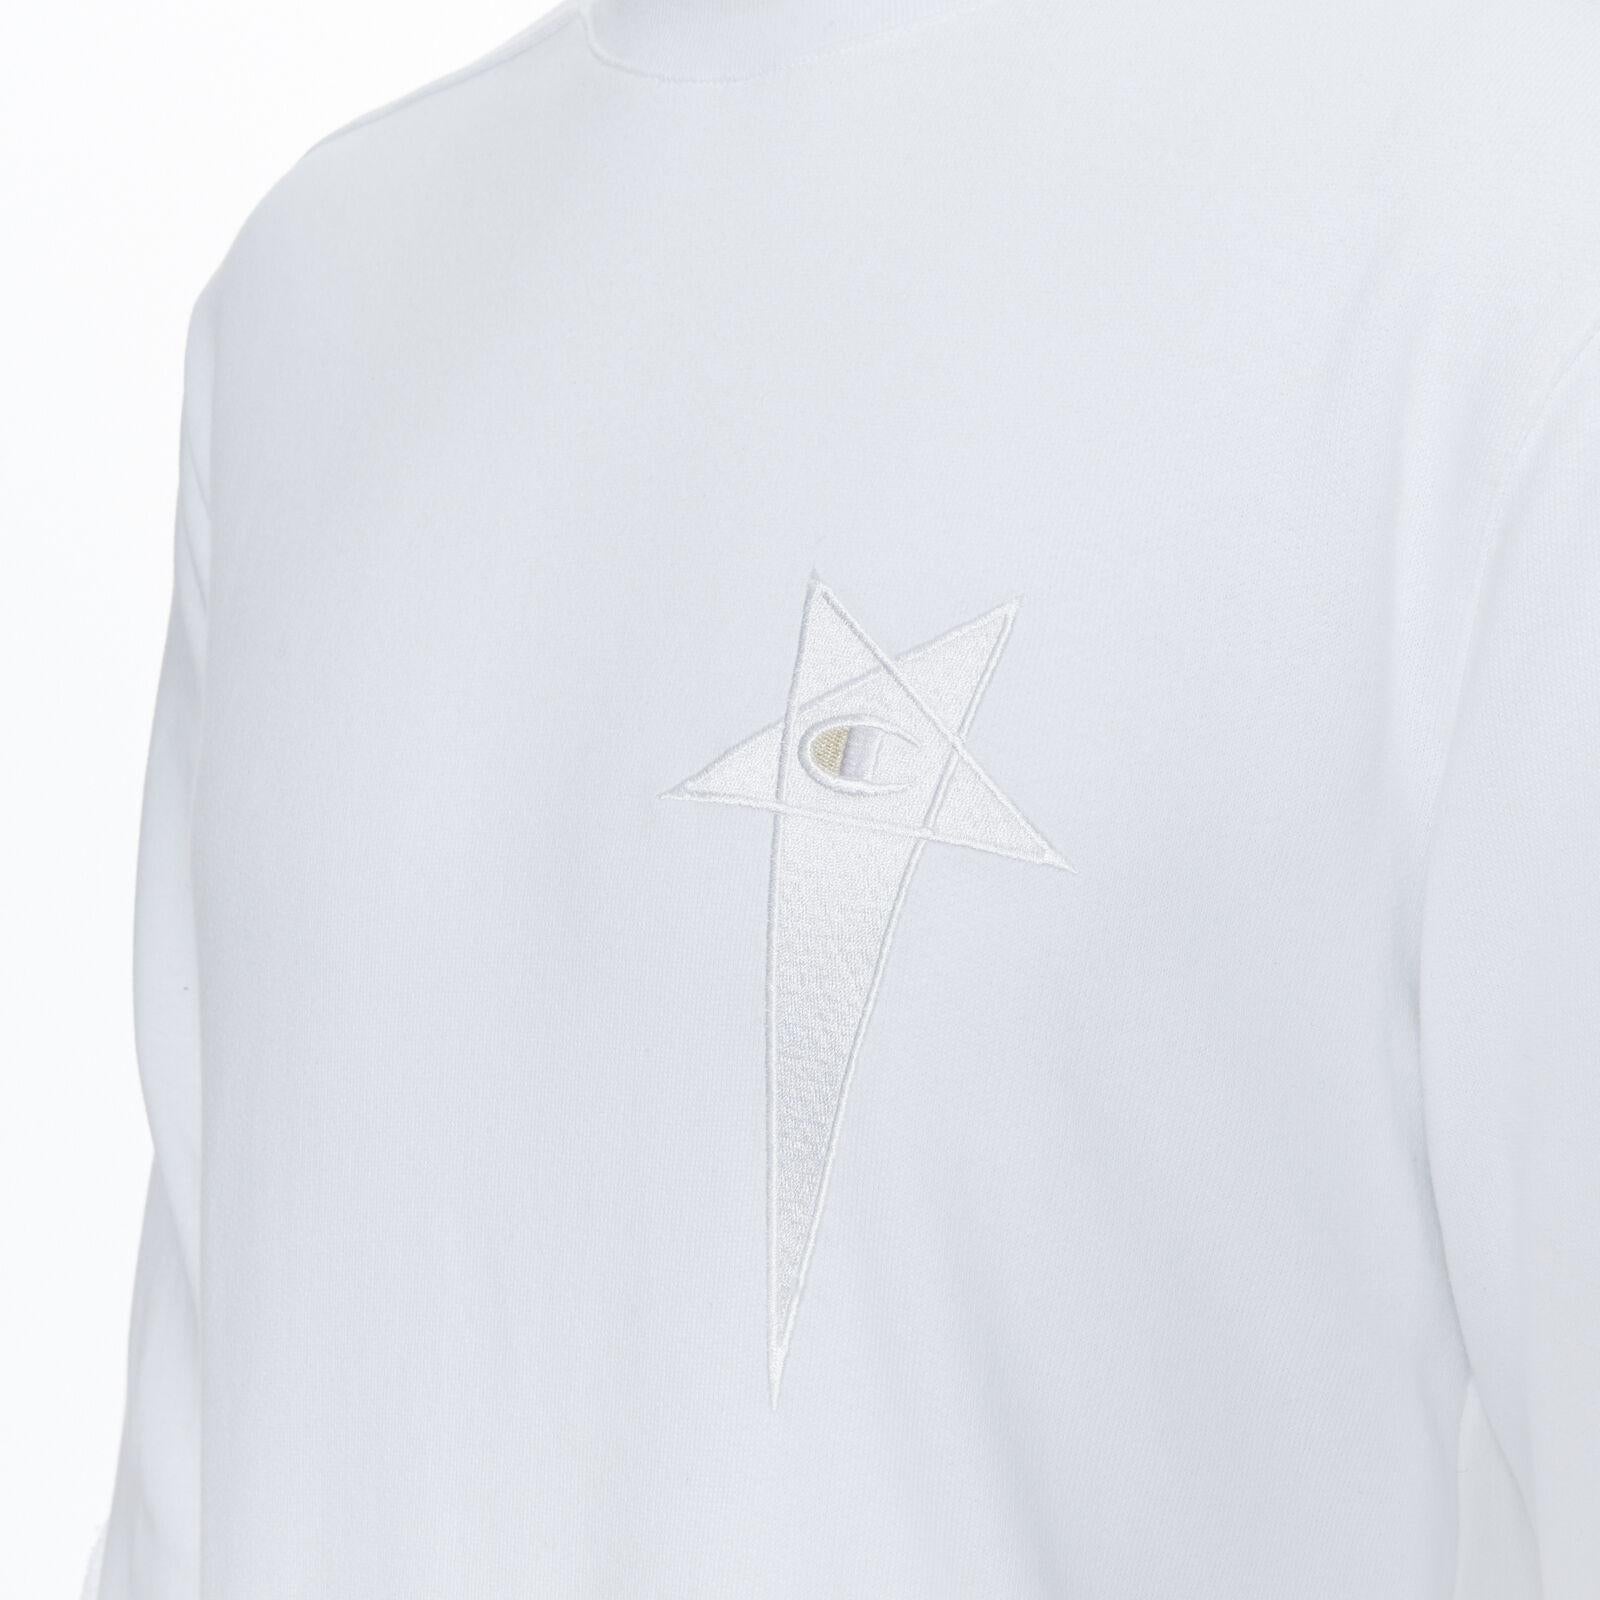 new RICK OWENS CHAMPION SS20 Tecuatl White Pentagram embroidered snap sweater M
Reference: TGAS/A05814
Brand: Rick Owens
Designer: Rick Owens
Model: Pentagram sweater
Collection: Spring Summer 2020 - Runway
Material: Cotton
Color: White, Off